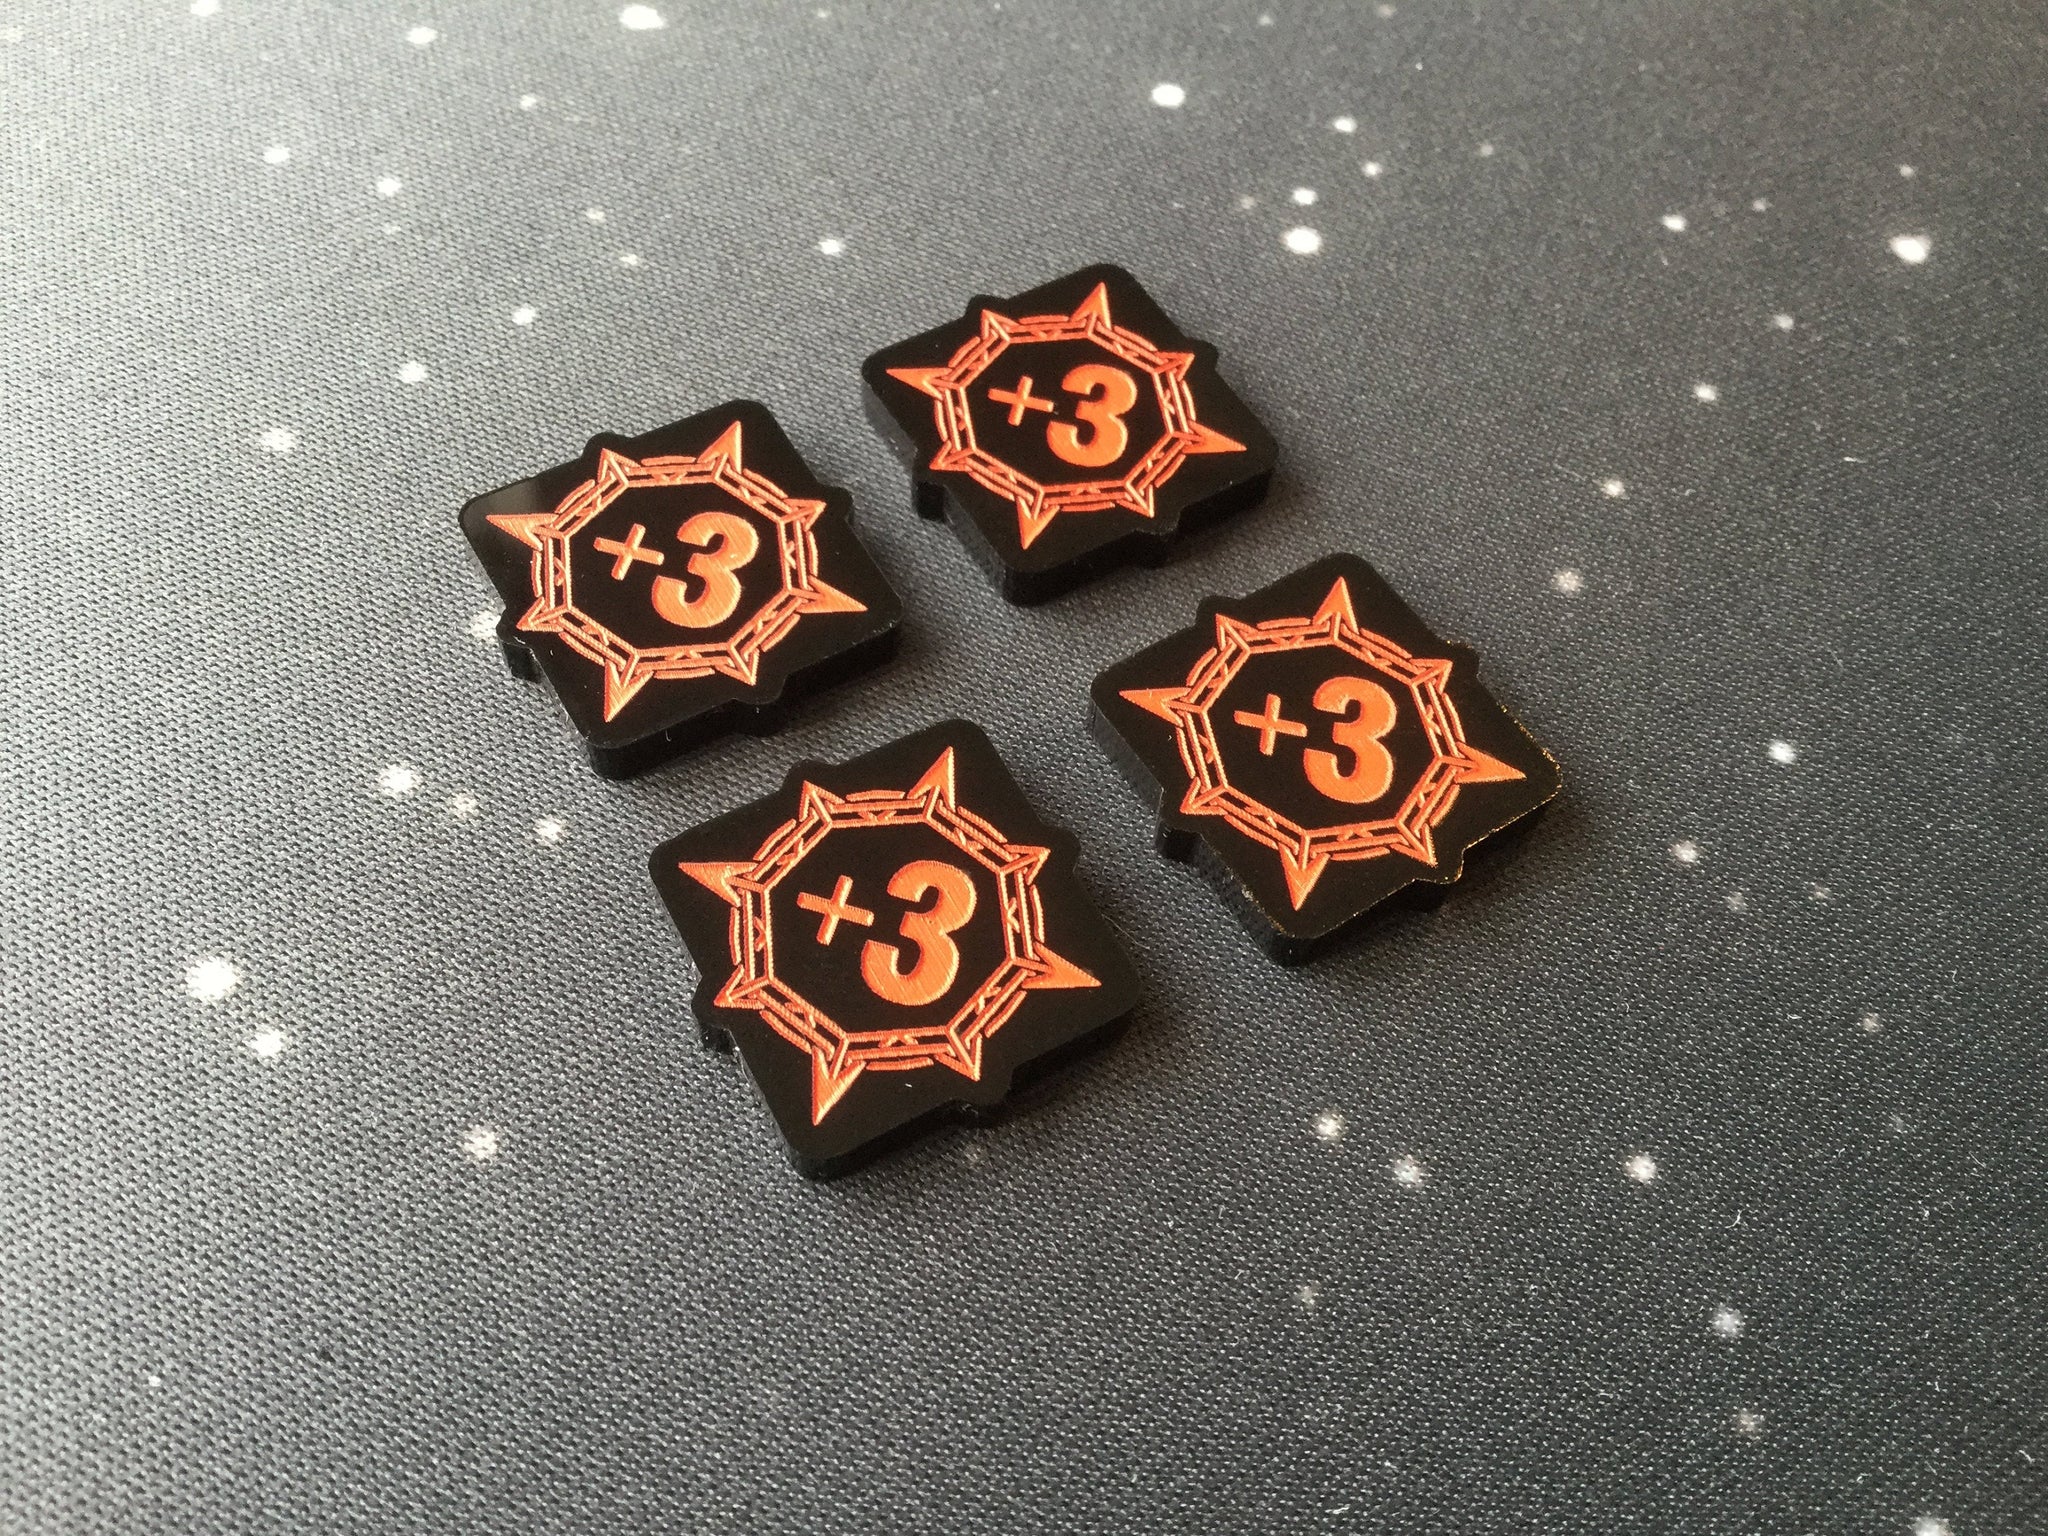 Keyforge compatible, acrylic power tokens